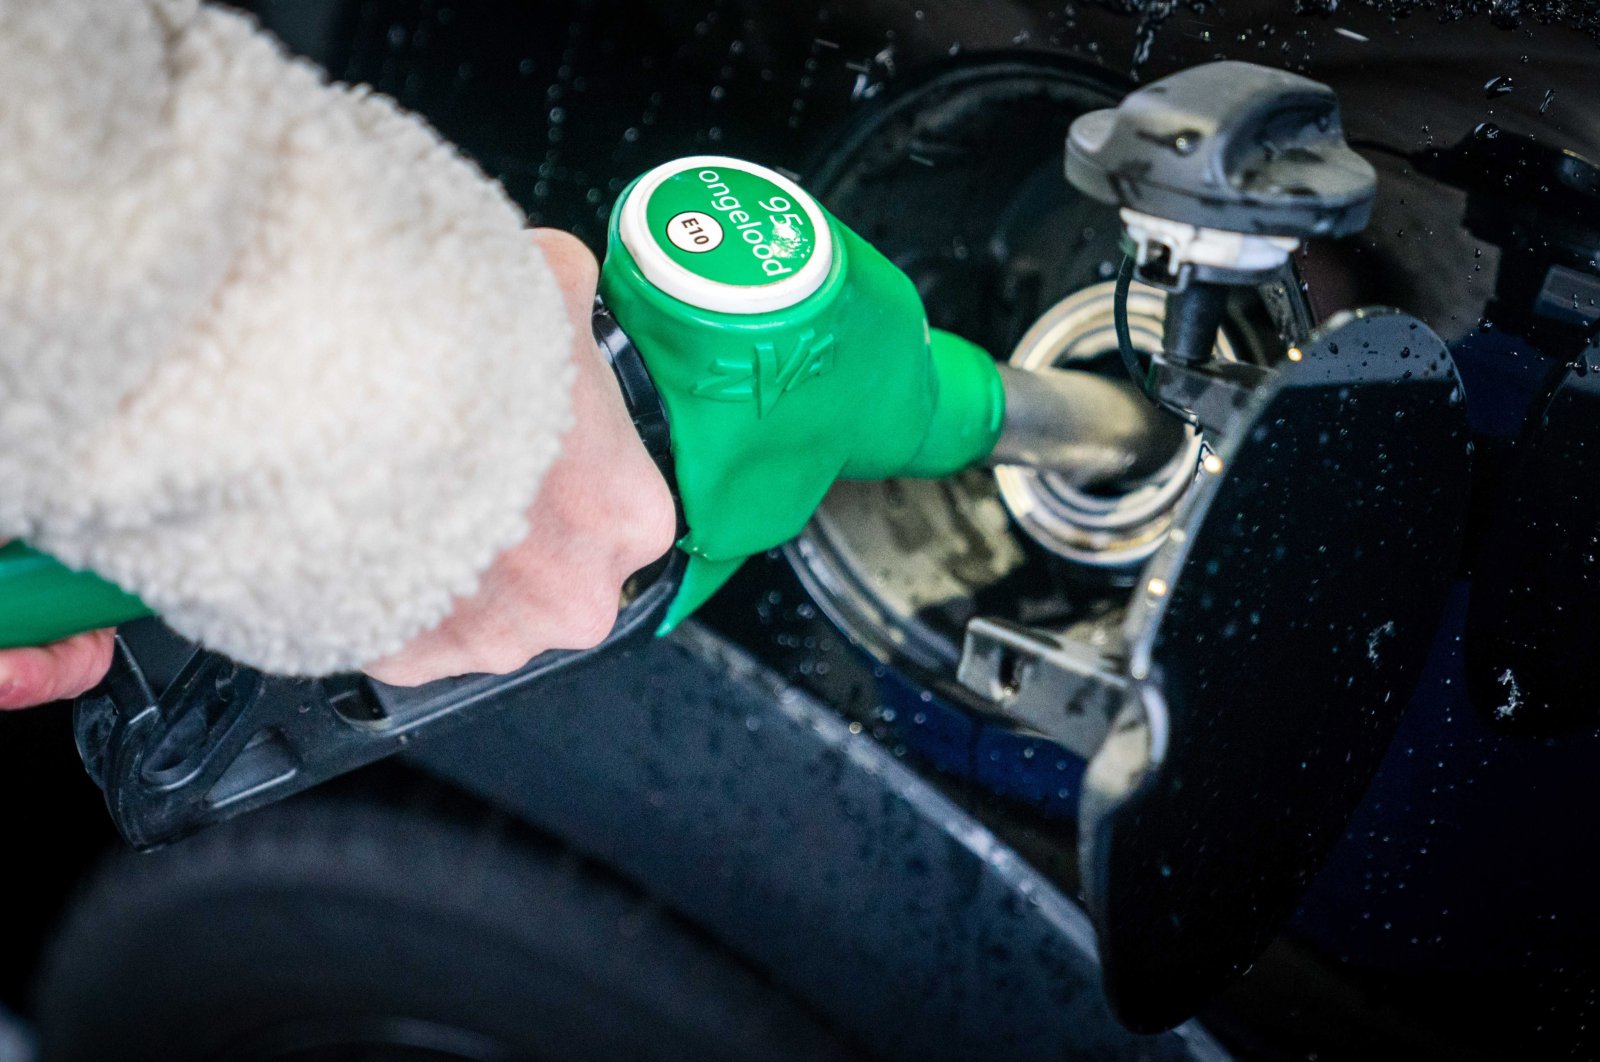 A person refuels at a Tango gas station in Mierlo, the Netherlands, April 1, 2022. (EPA Photo)